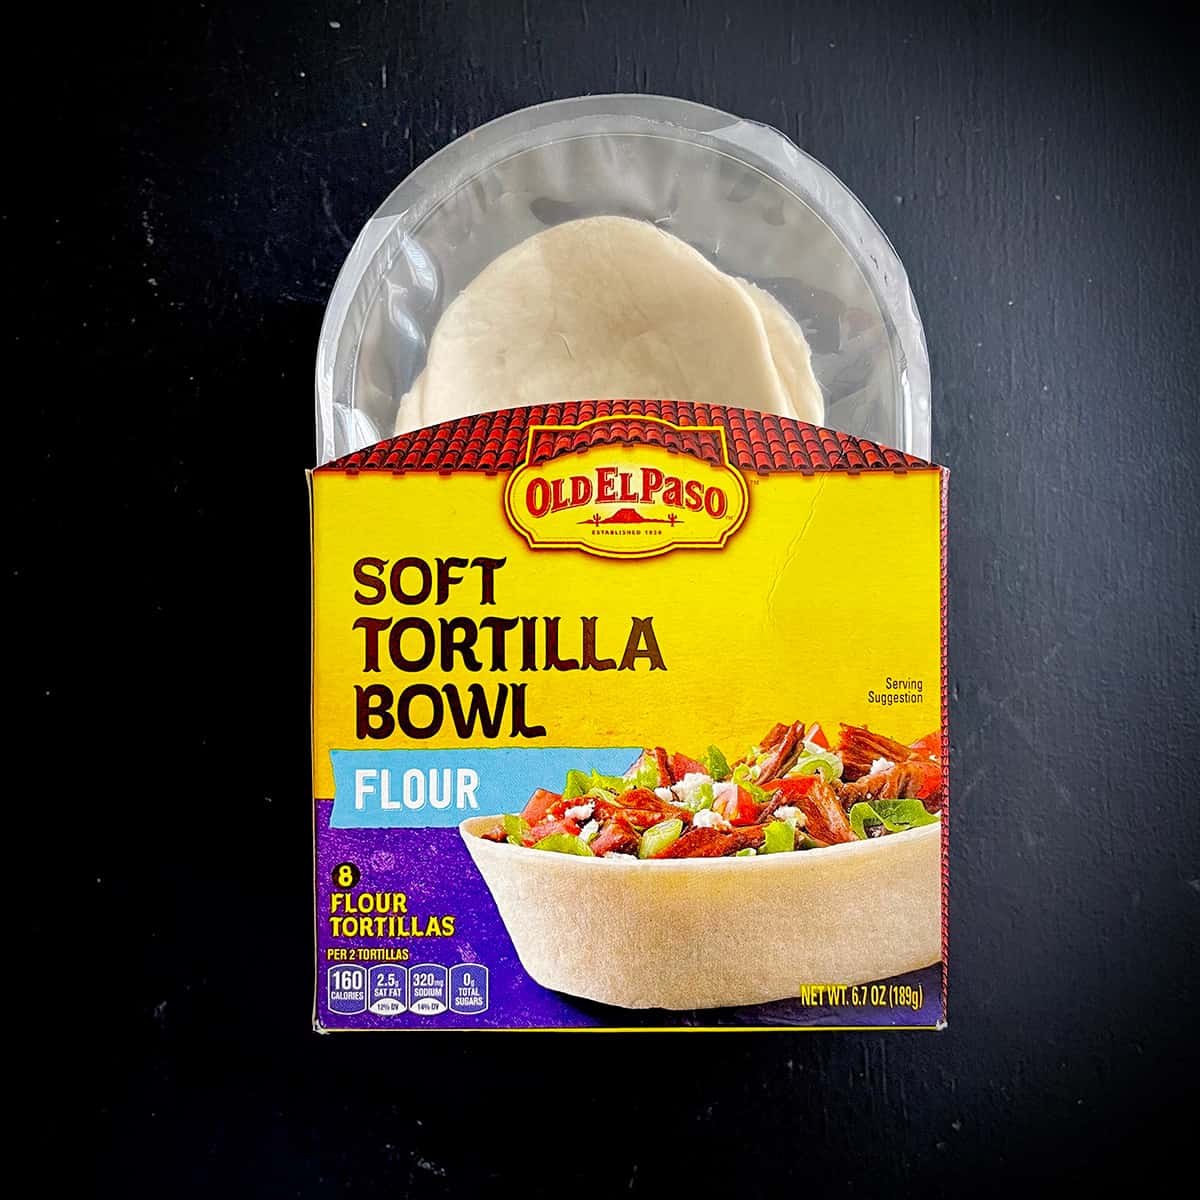 A package of Old El Paso brand Soft Tortilla Bowls.